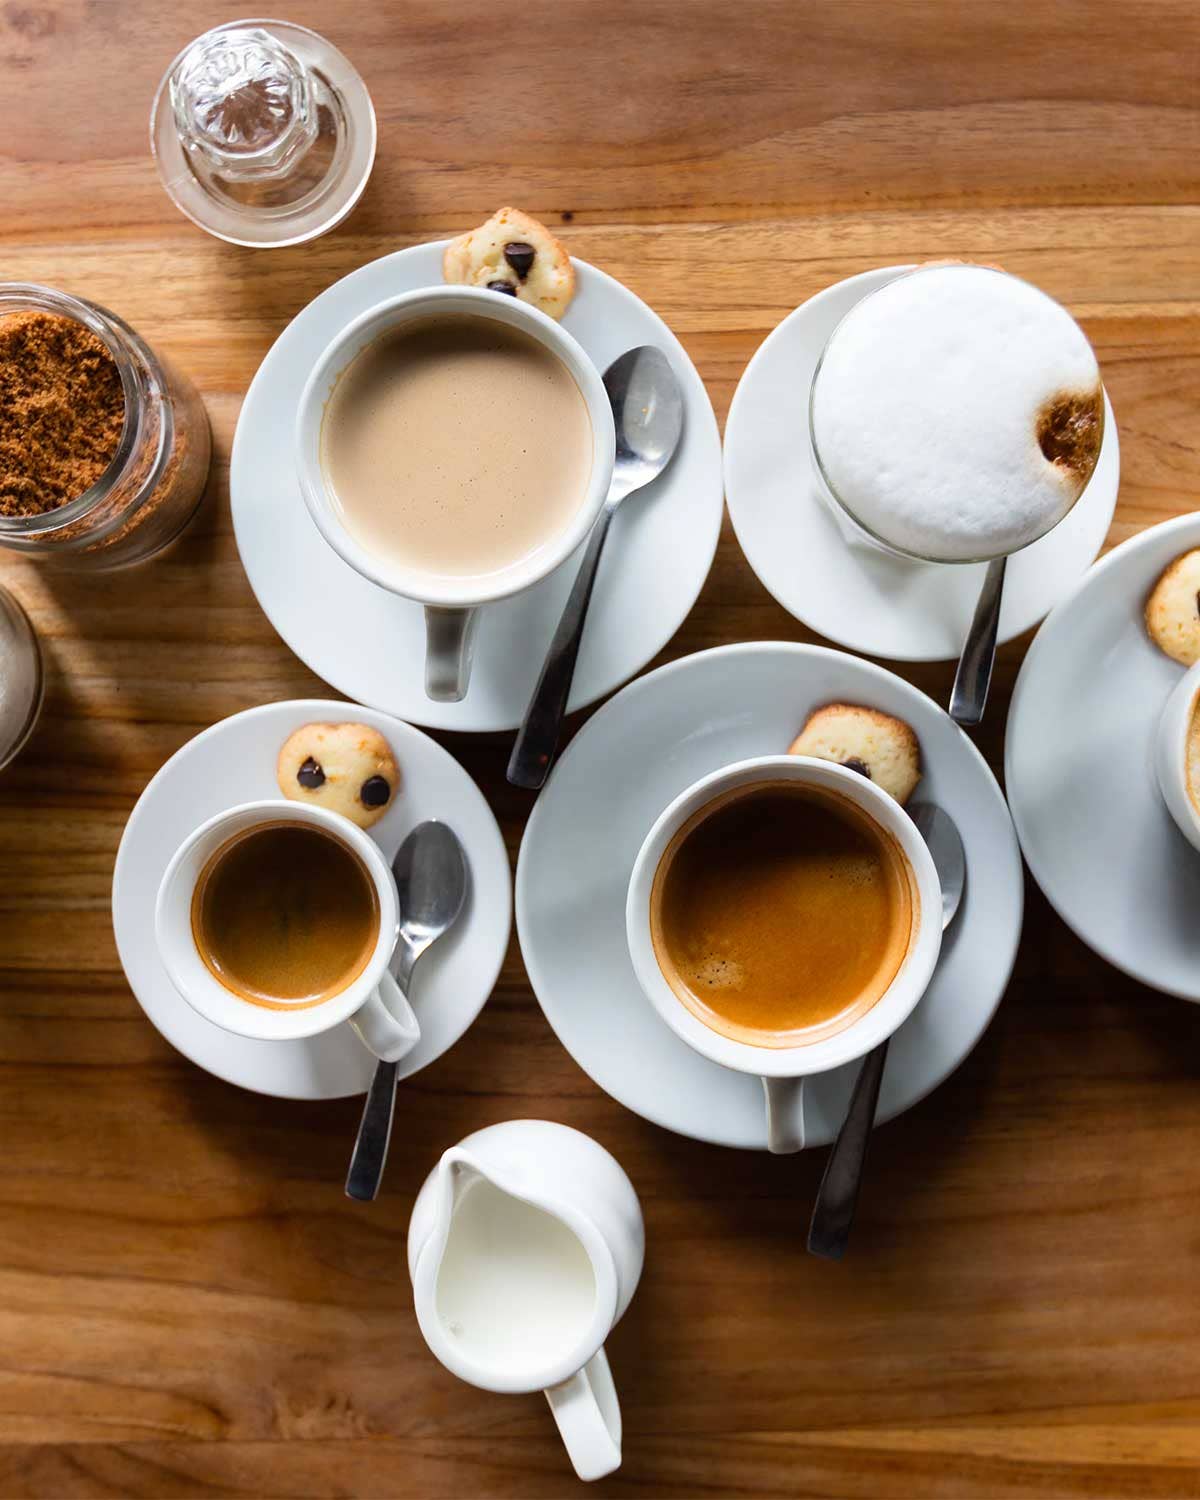 Cups of coffee on a wooden table